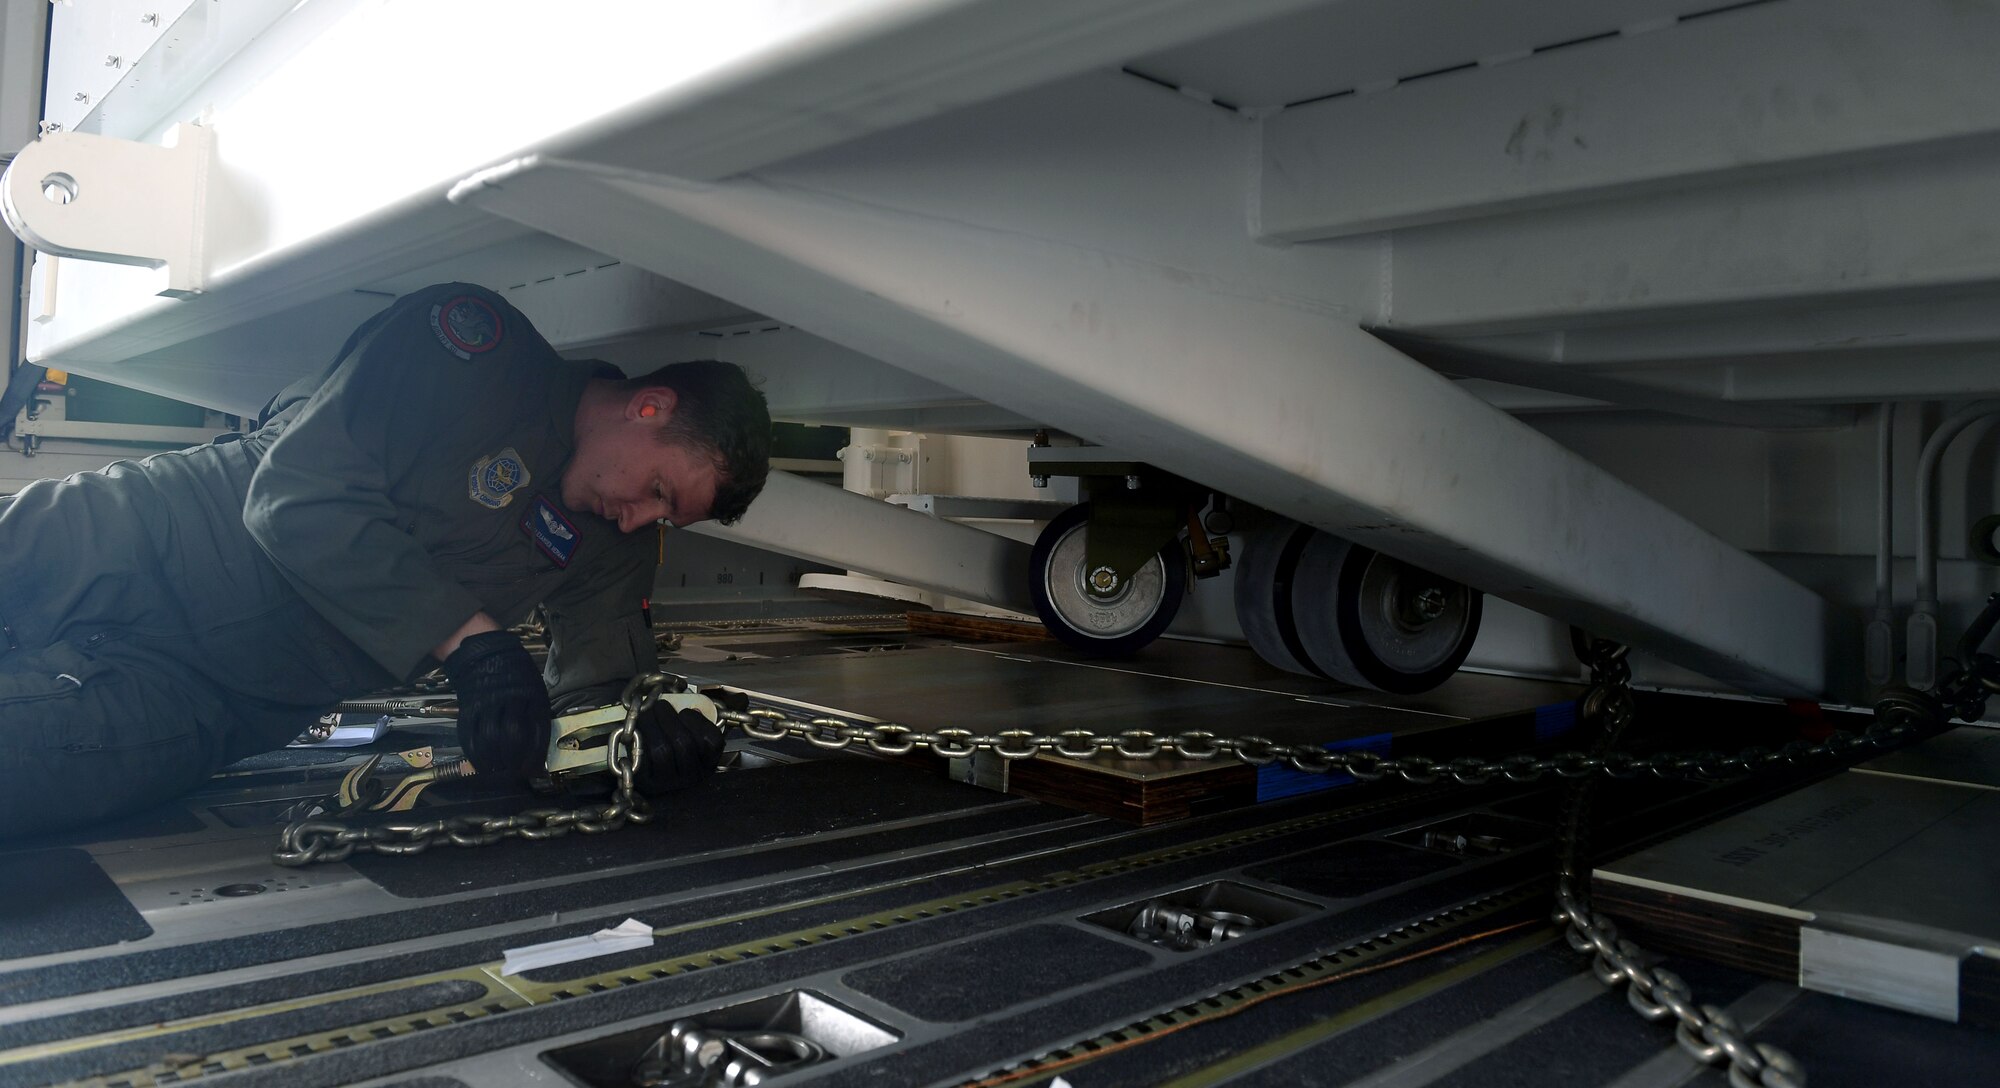 Airman 1st Class Alexander Herman, a loadmaster assigned to the 4th Airlift Squadron, secures the very first GPS III satellite, SV-01, affectionately dubbed “Vespucci” in honor of Amerigo Vespucci, the Italian explorer for whom the Americas were named, onto a C-17 Globemaster III in preparation for takeoff from Buckley Air Force Base, Colorado, Aug. 20, 2018.